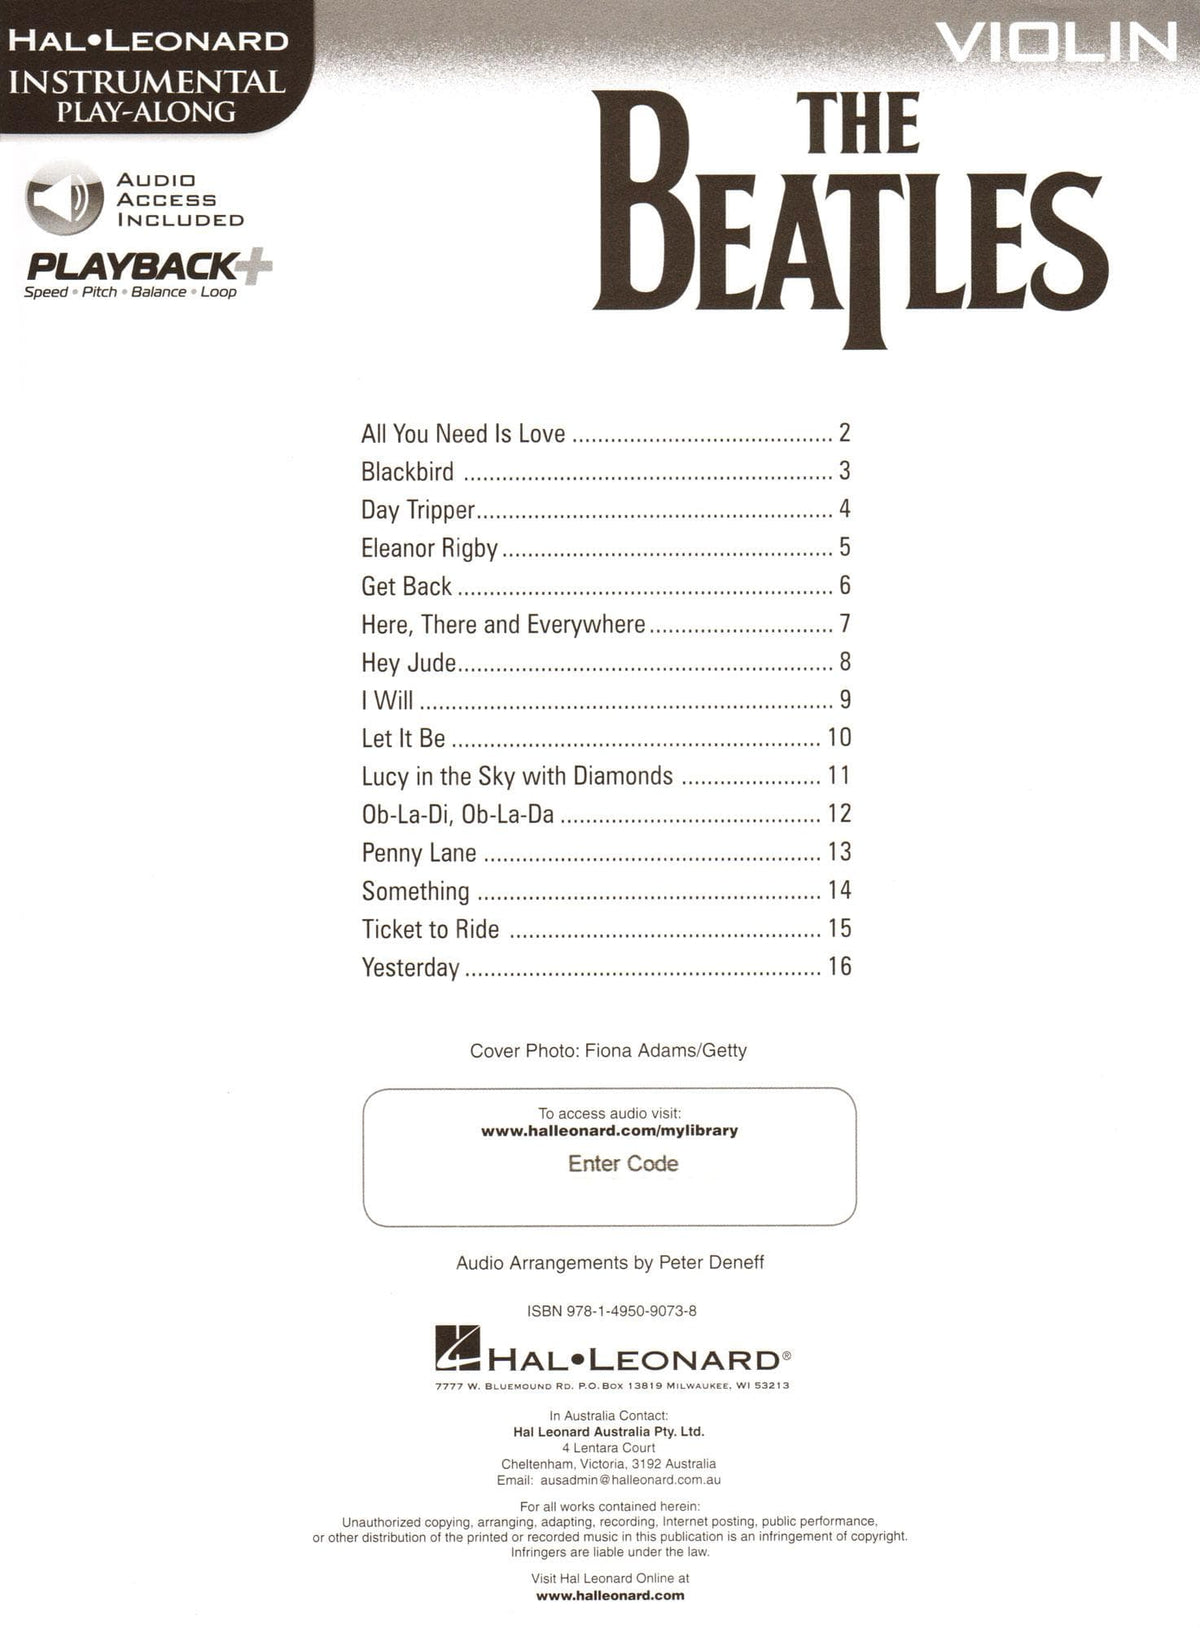 The Beatles - Instrumental Play-Along - 15 Songs - for Violin with Online Audio - Hal Leonard